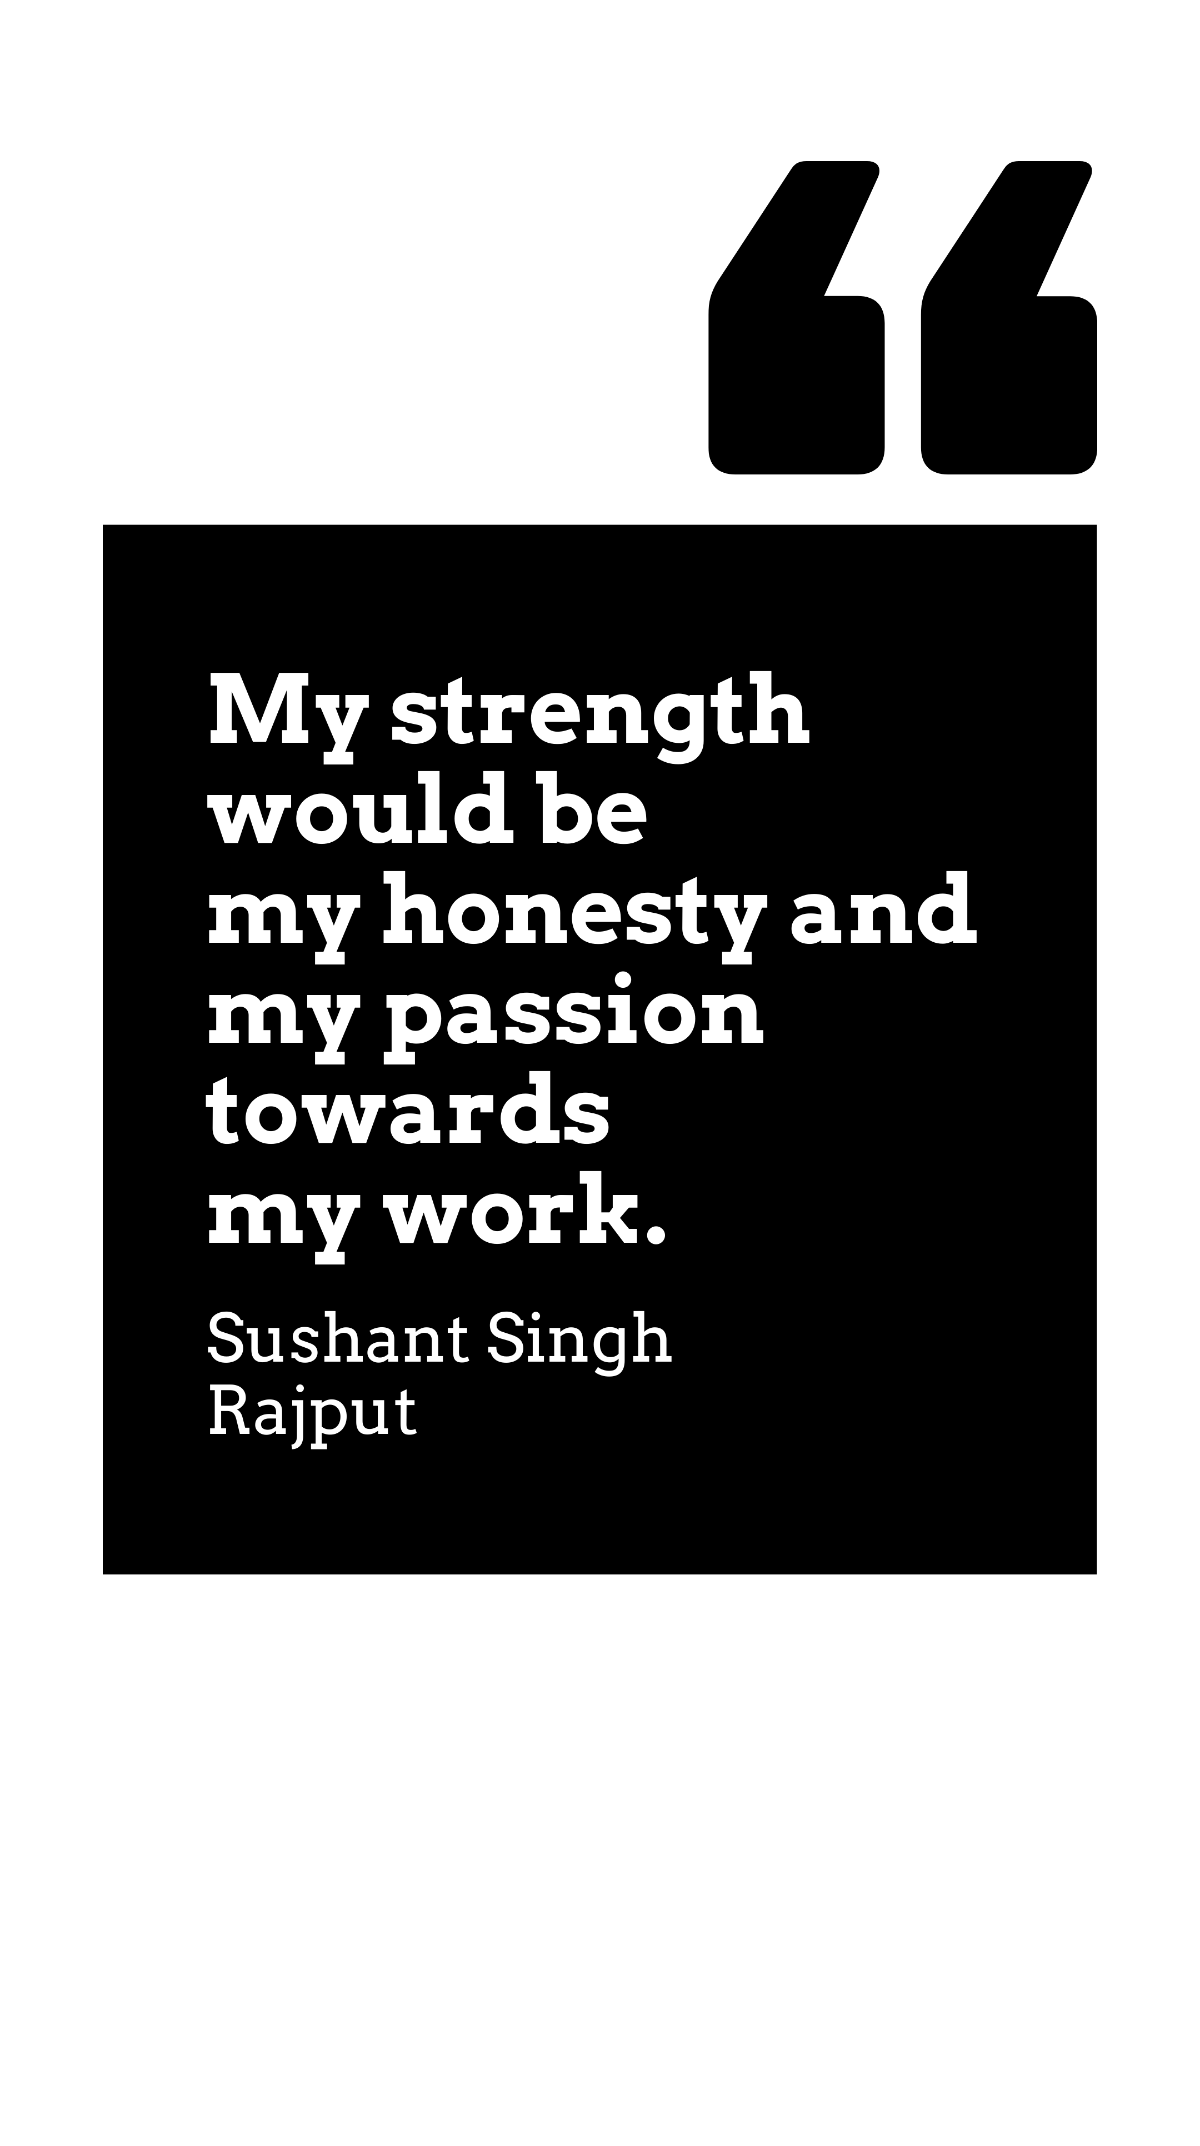 Sushant Singh Rajput - My strength would be my honesty and my passion towards my work. Template